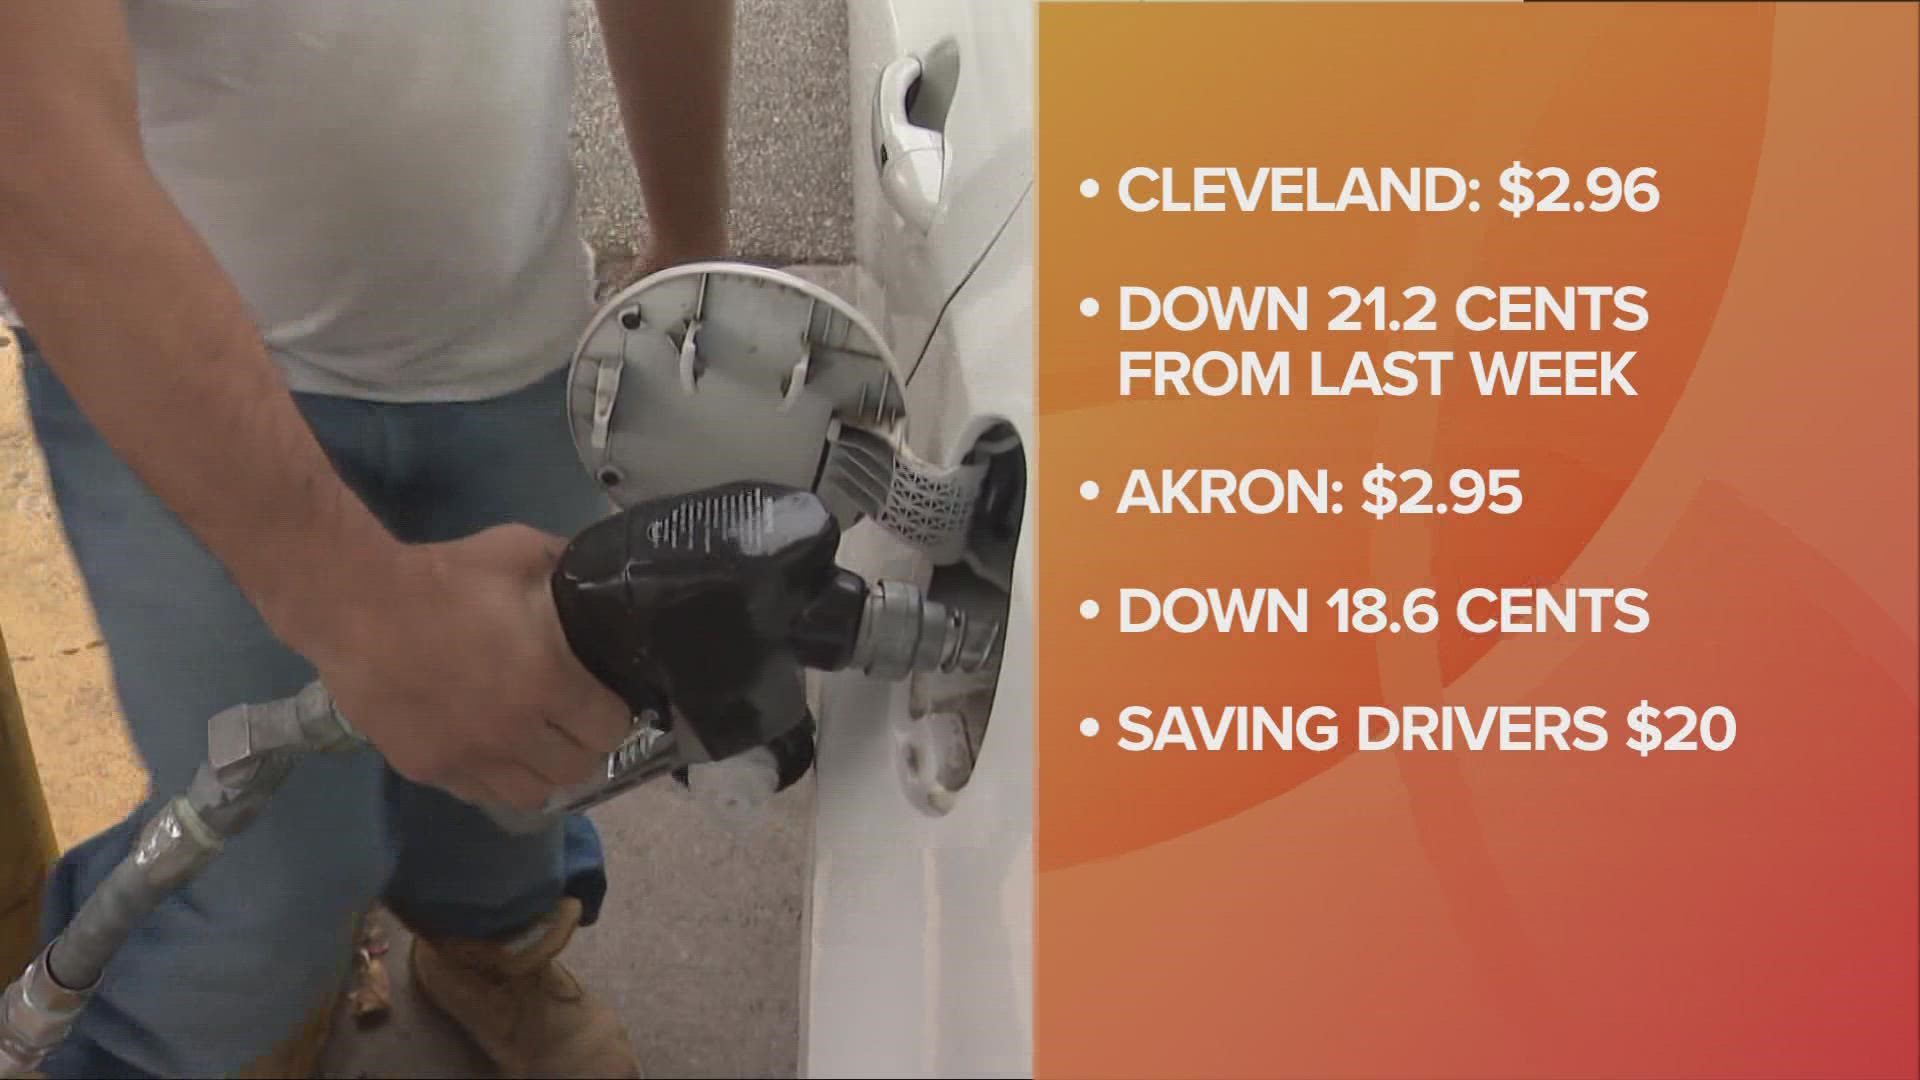 GasBuddy says gas prices in Cleveland are now 77.1 cents lower than one month ago.